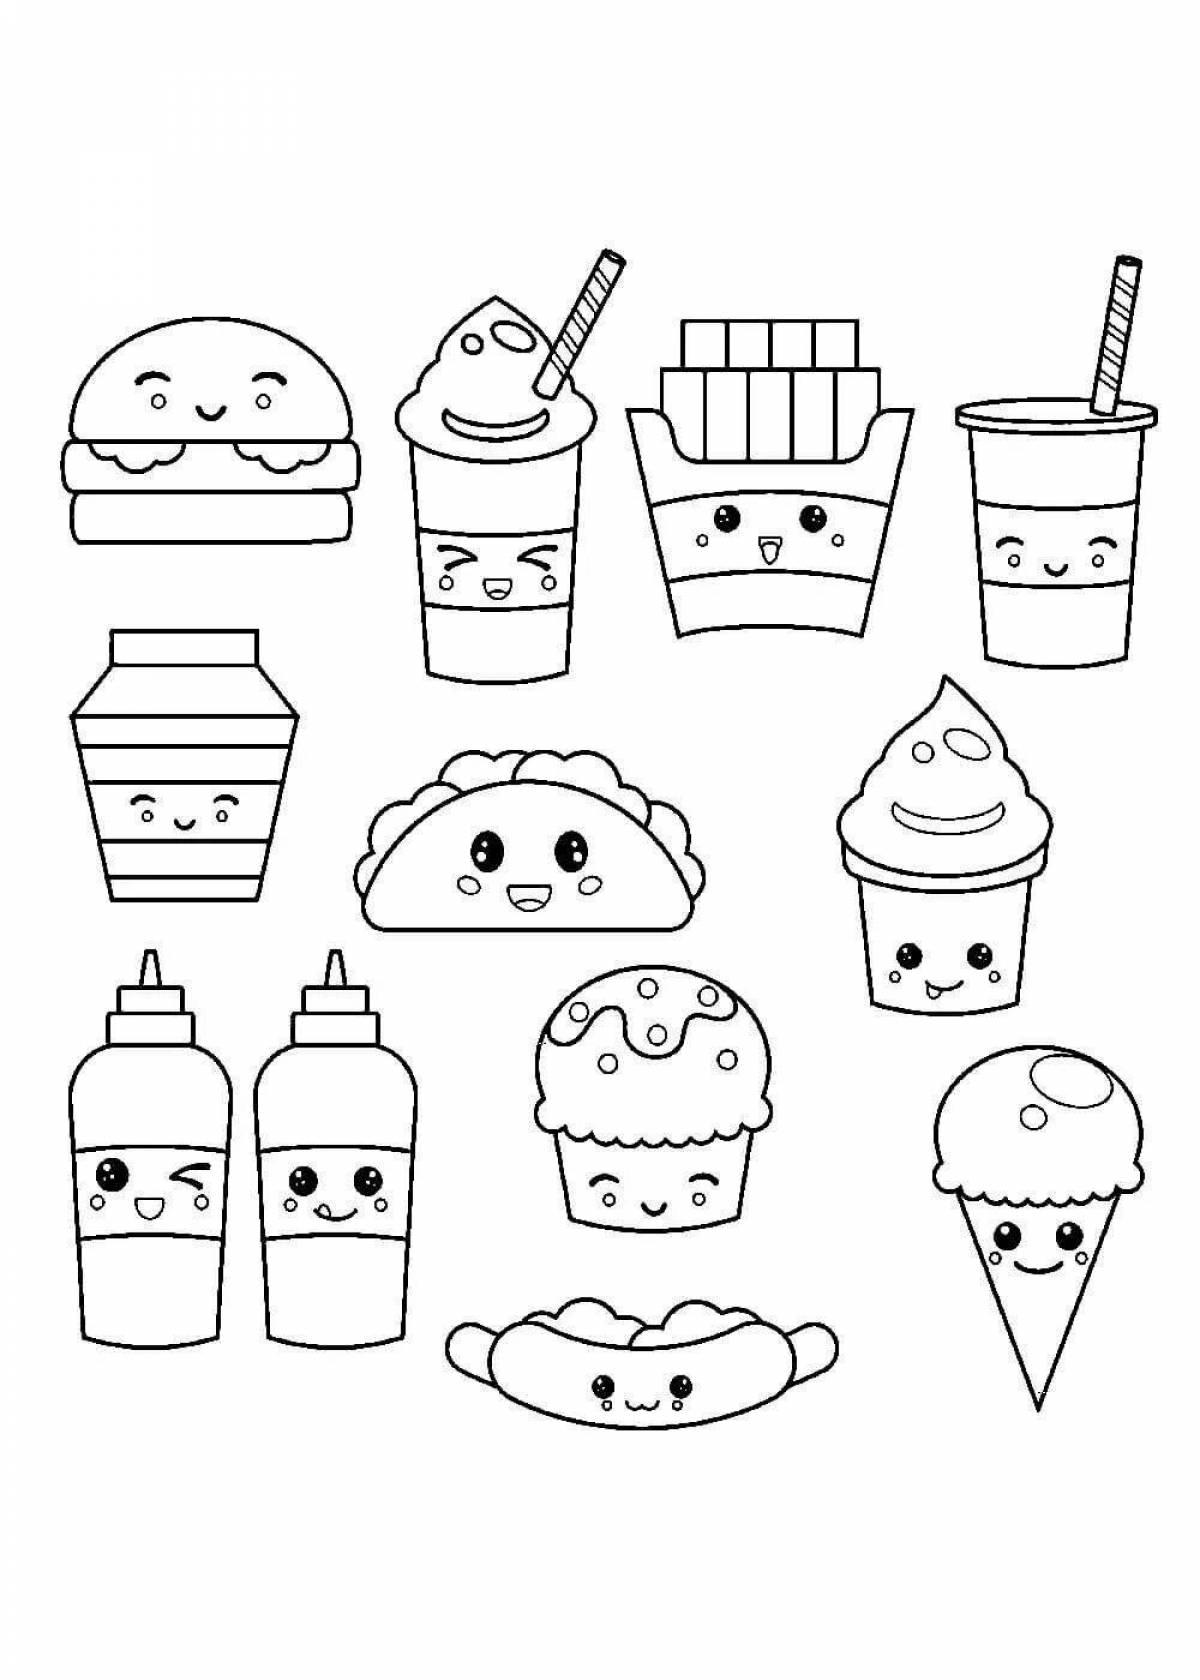 Cute stickers for coloring